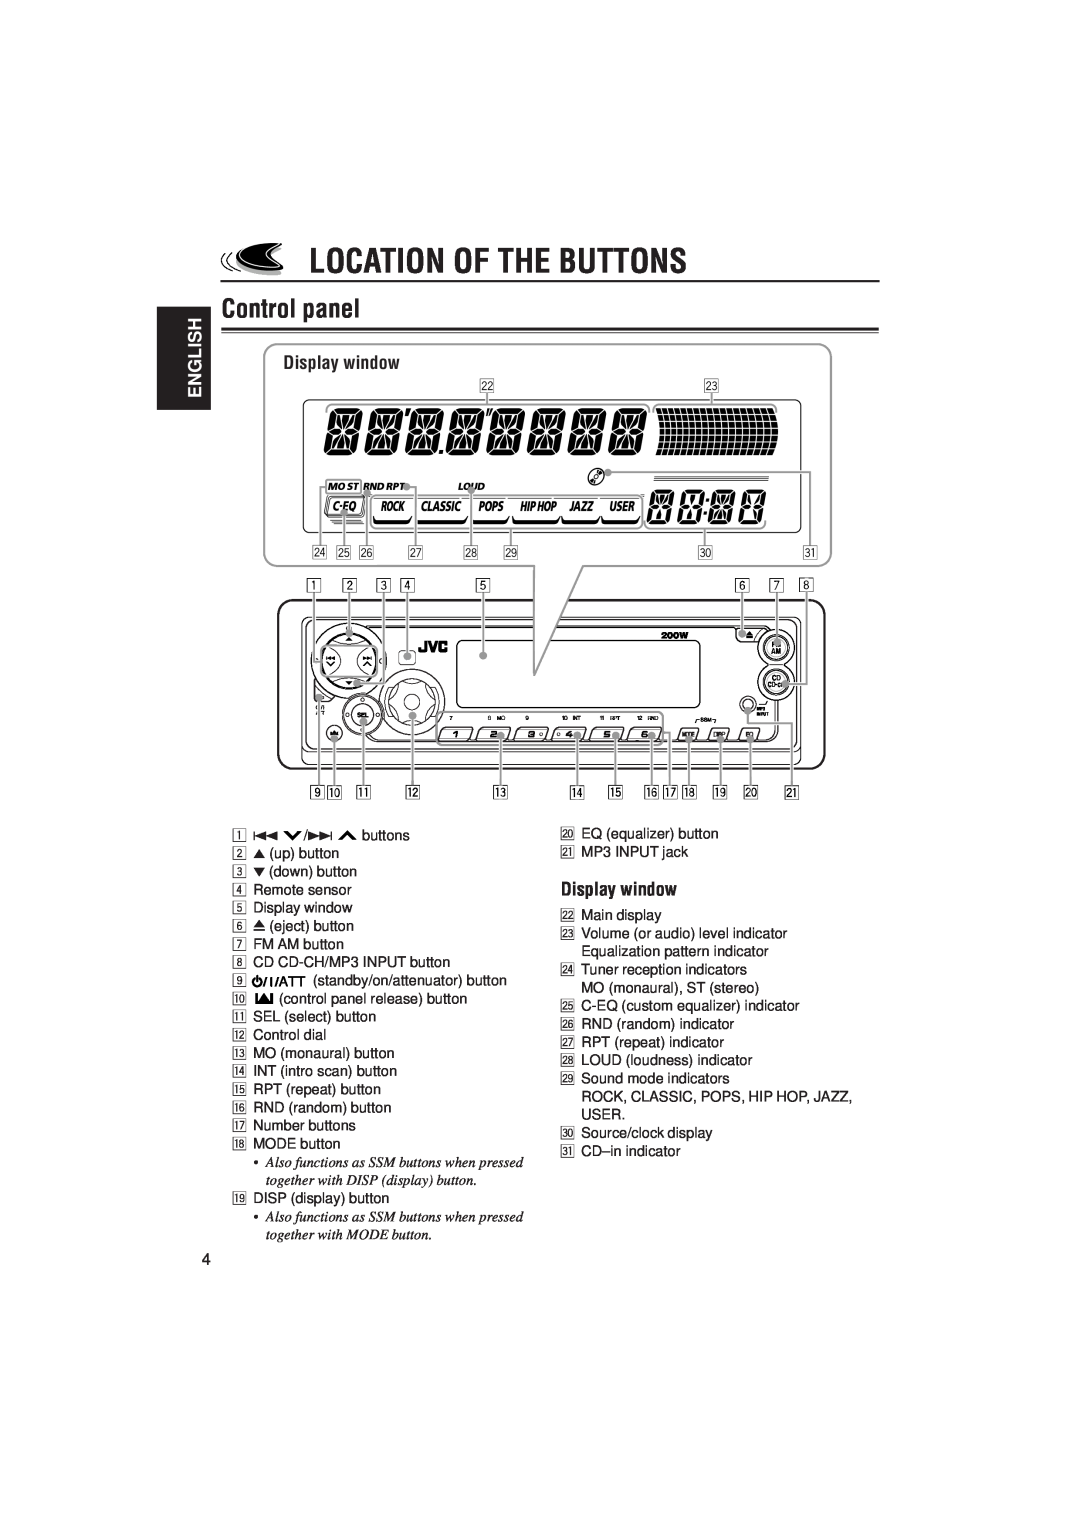 JVC KD-SX8250, KD-SX780 manual Location Of The Buttons, Control panel, Display window, English 